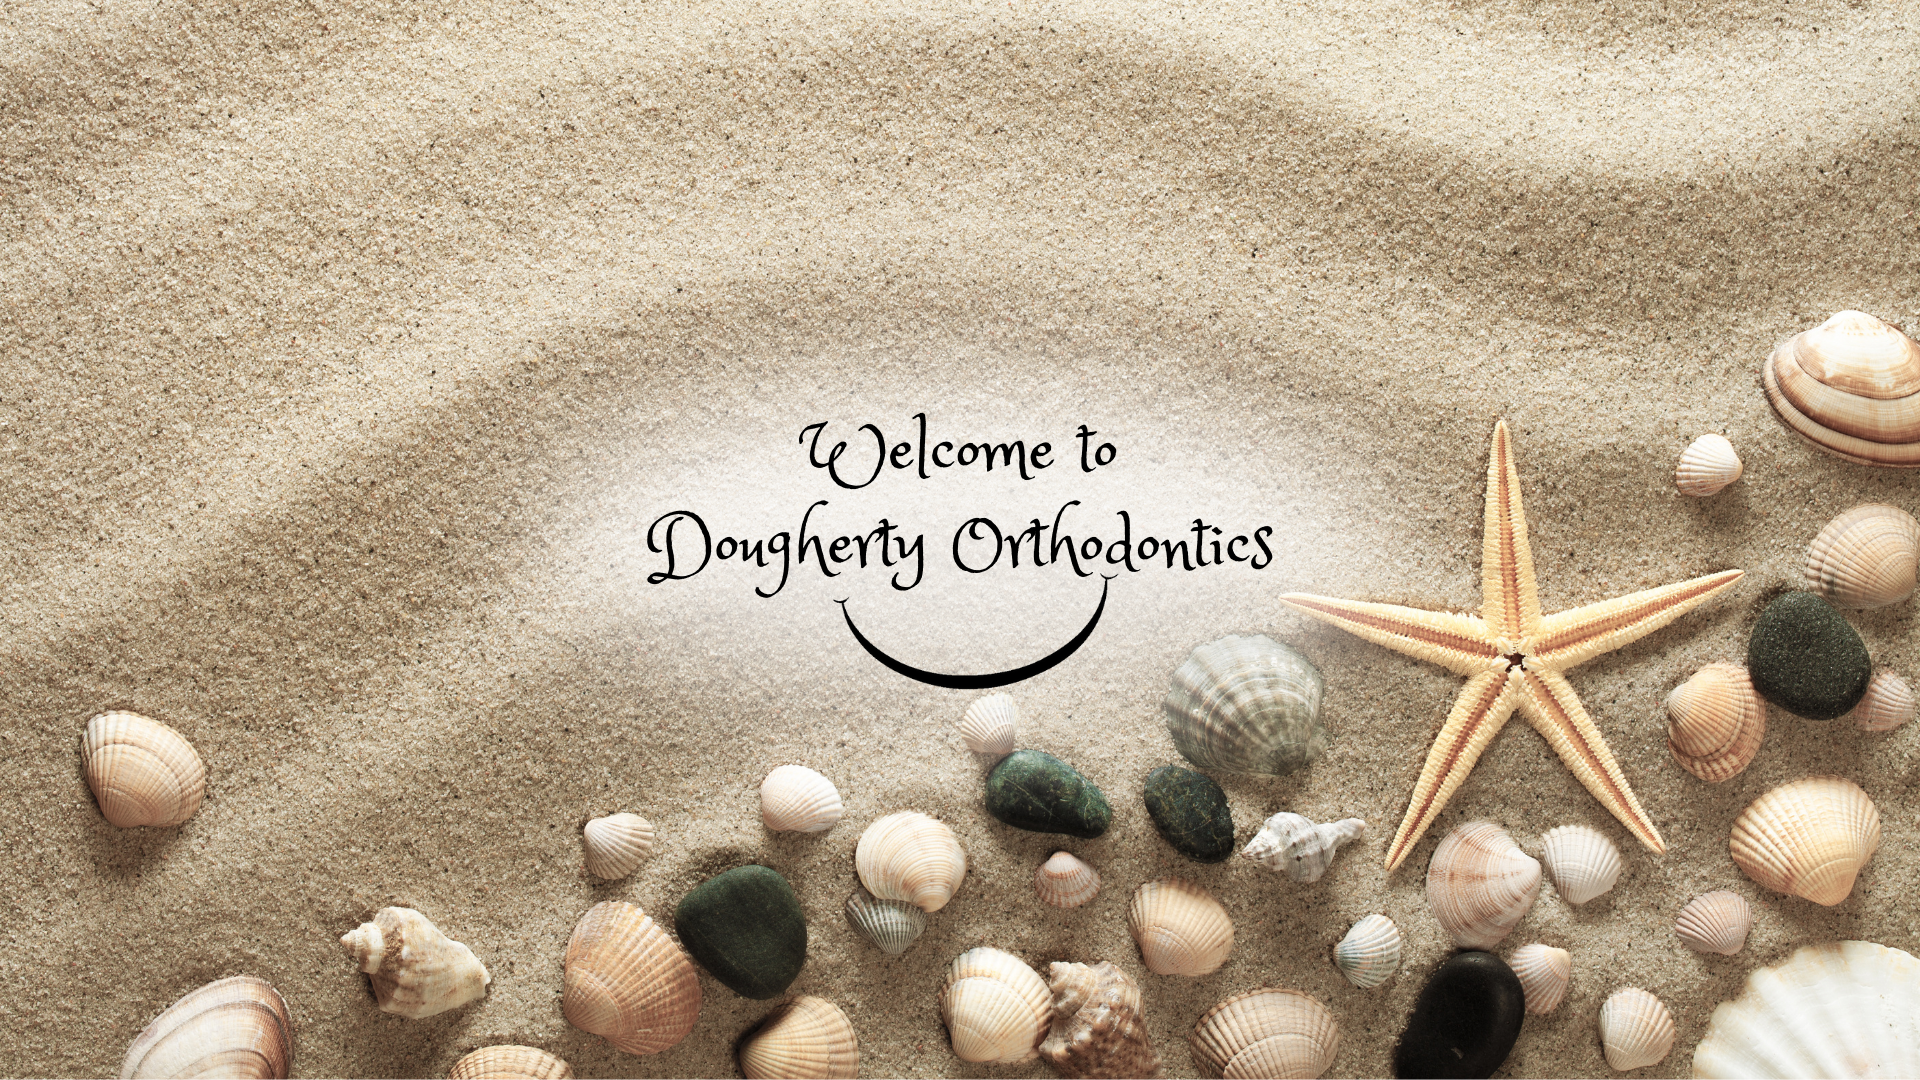 Sand and seashell background "Welcome to Dougherty Orthodontics"